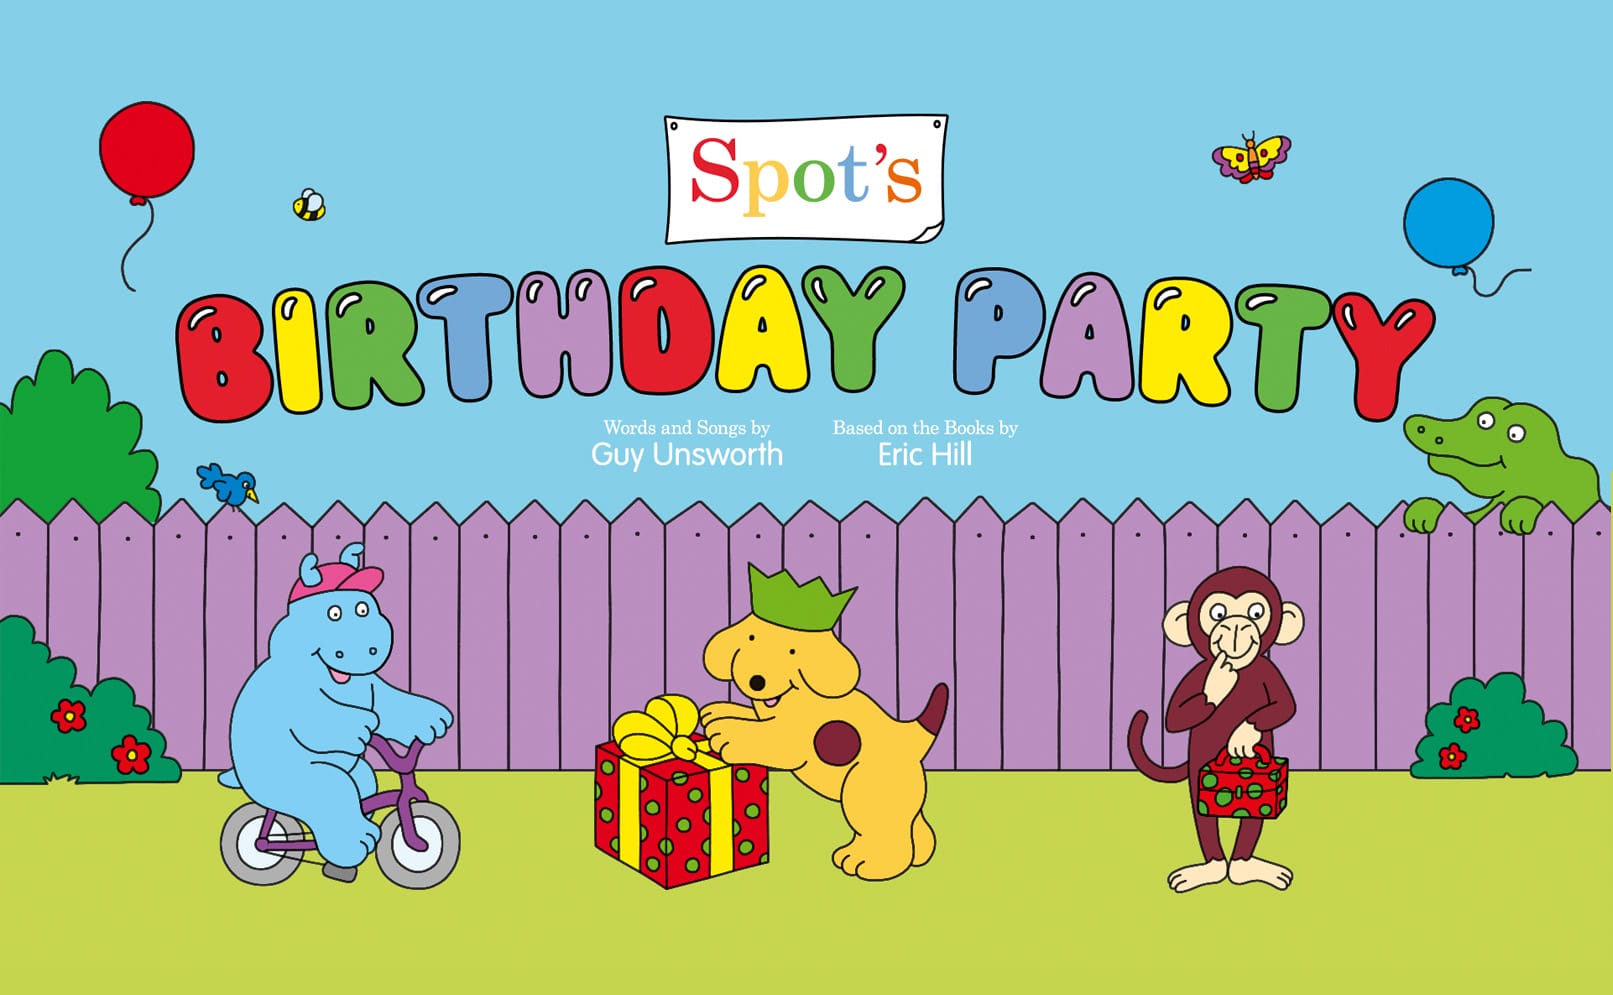 The iconic 'Spot' artwork is featured centrally. Spot is a yellow dog with brown spots, he is riding a bike with his friends, a blue hippo and brown monkey. Text reads Spot's Birthday Party in large rainbow lettering.